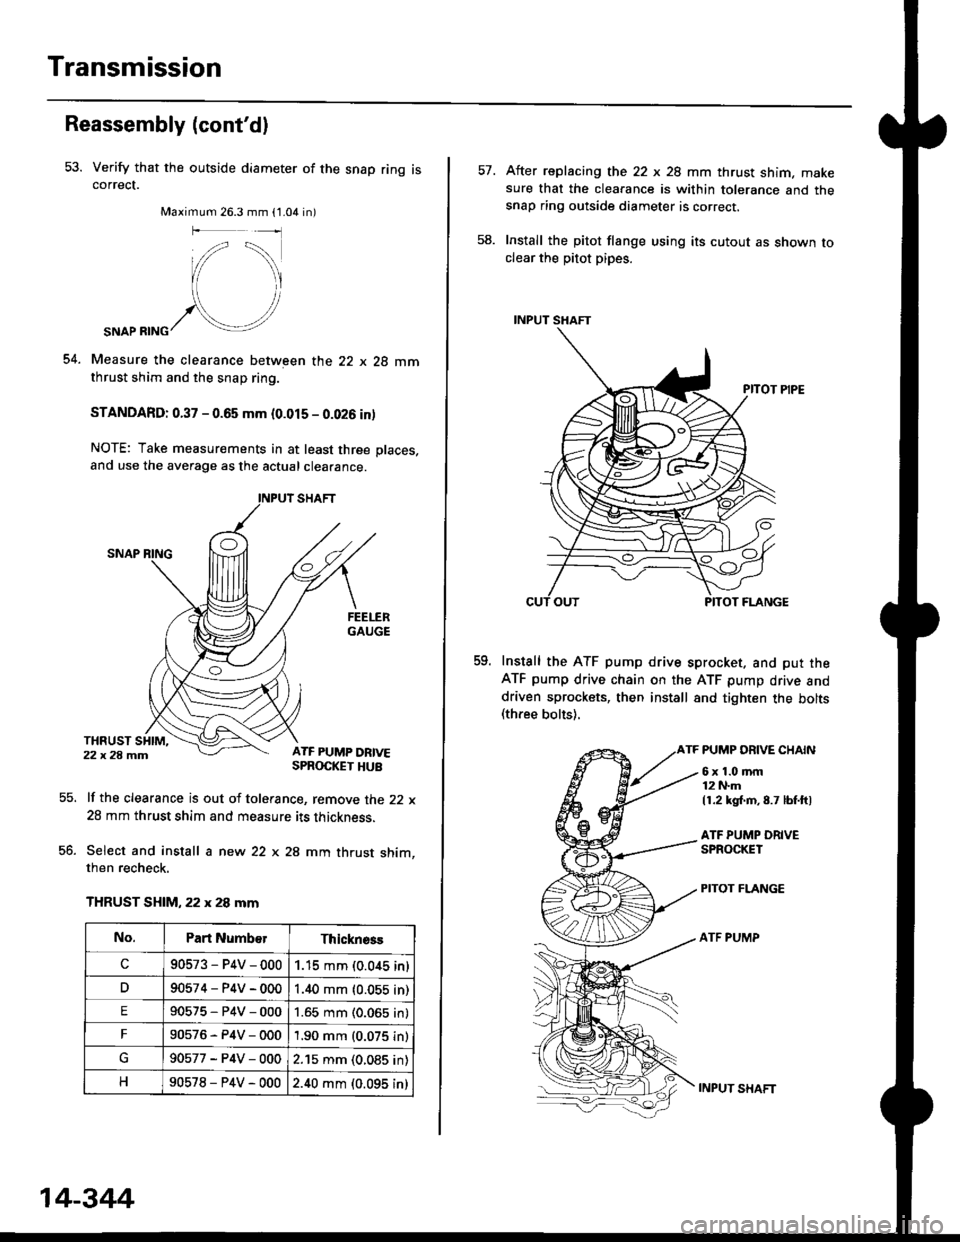 HONDA CIVIC 1996 6.G Workshop Manual Transmission
Reassembly (contd)
53. Verify that the outside diameter of the snap ring iscorrect.
Maximum 26.3 mm (1.04 in)
54.
SNAP RING
Measure the clearance between the 22 x 28 mmthrust shim and th